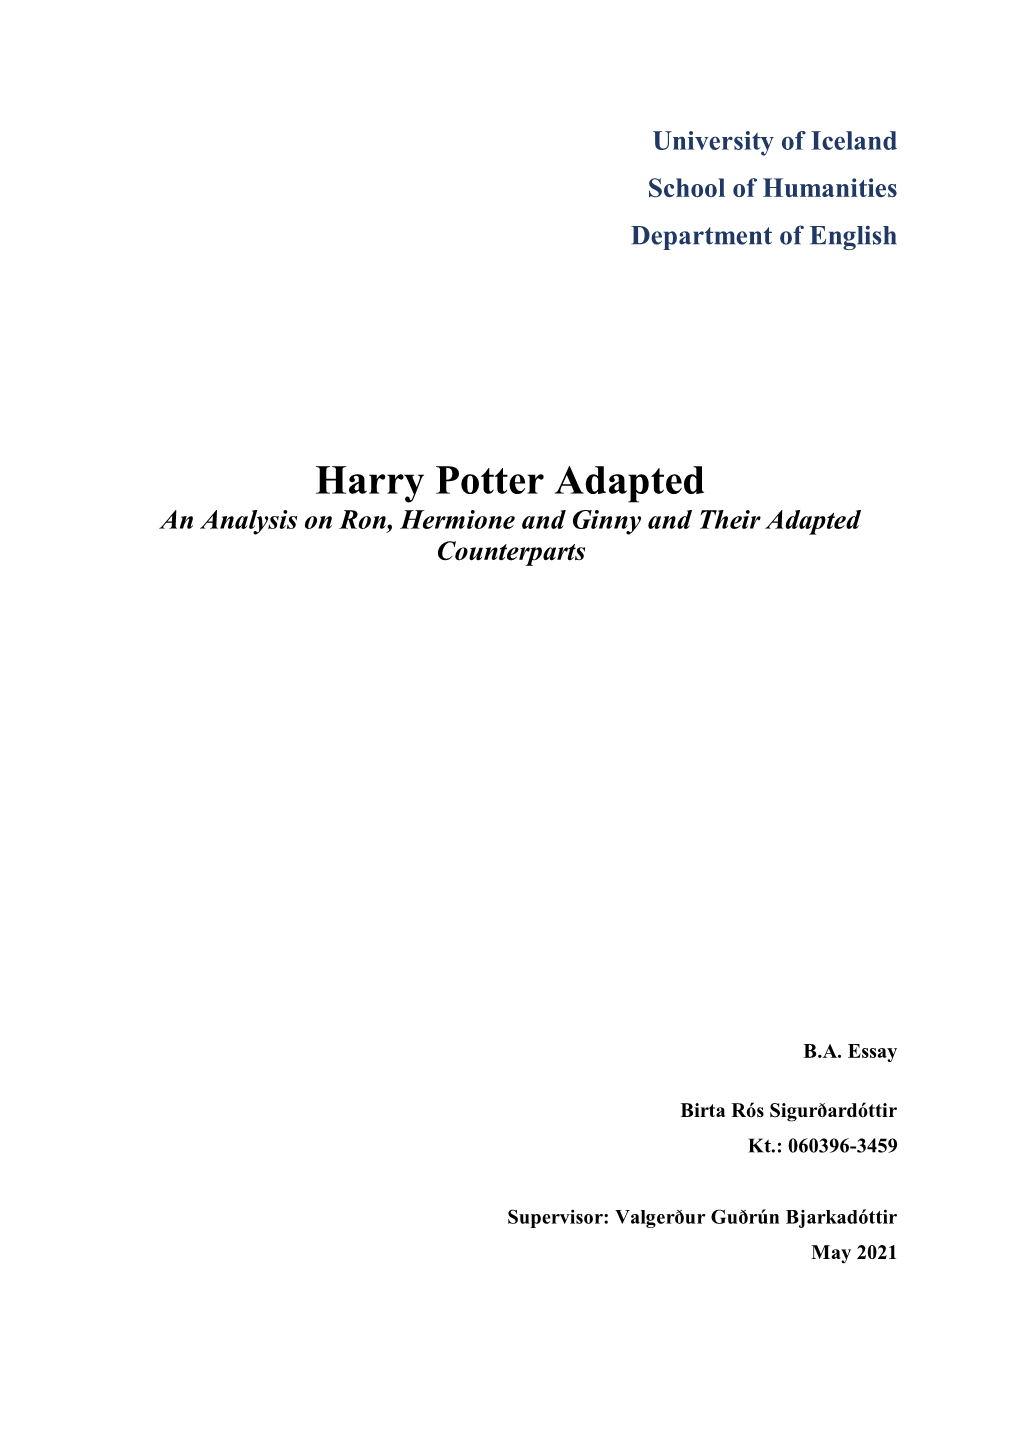 Harry Potter Adapted an Analysis on Ron, Hermione and Ginny and Their Adapted Counterparts